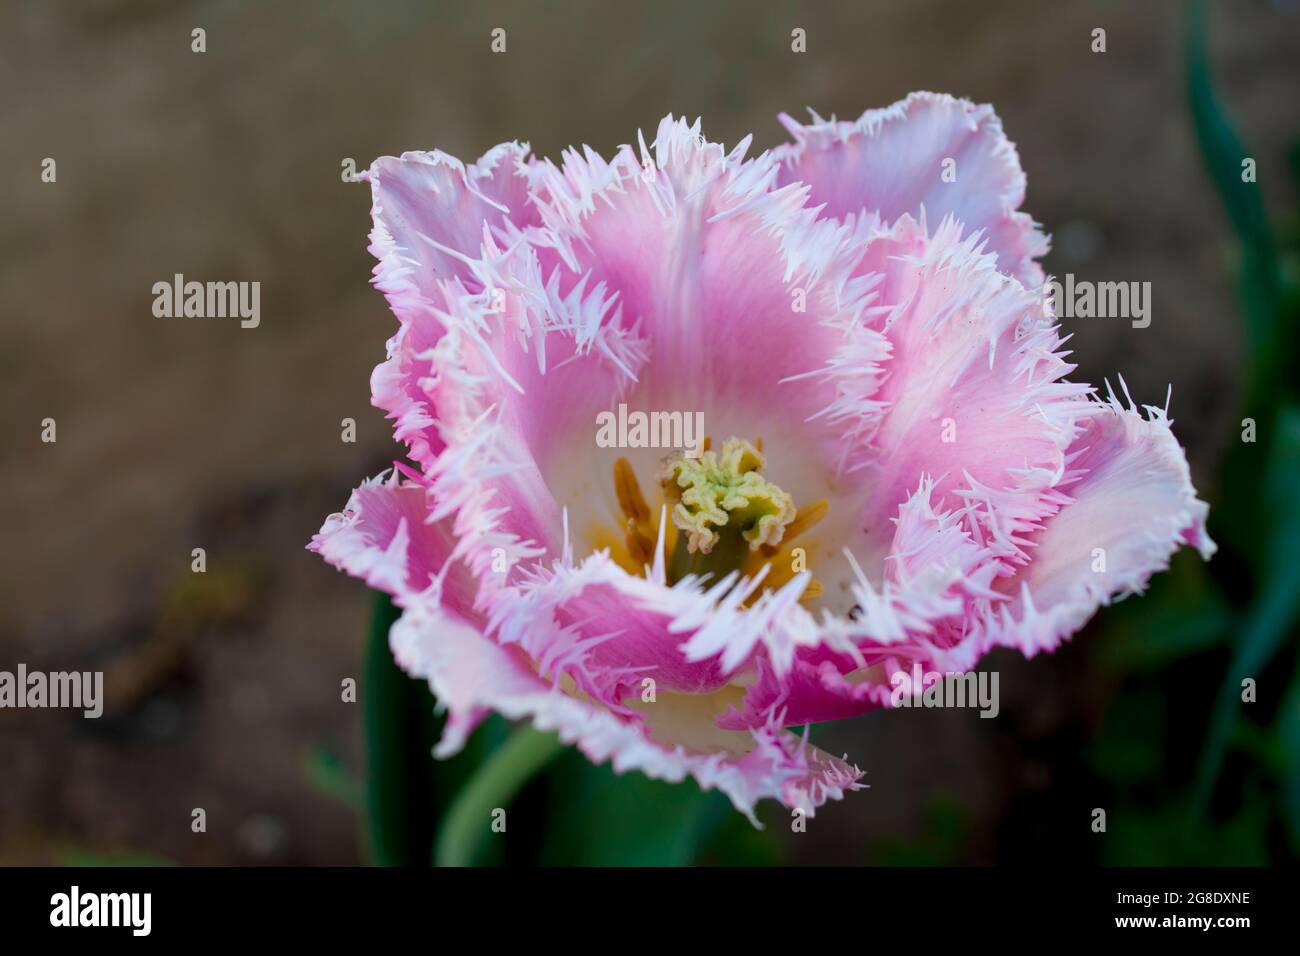 terry fluffy flower tulip white and pink on a dark background Stock Photo